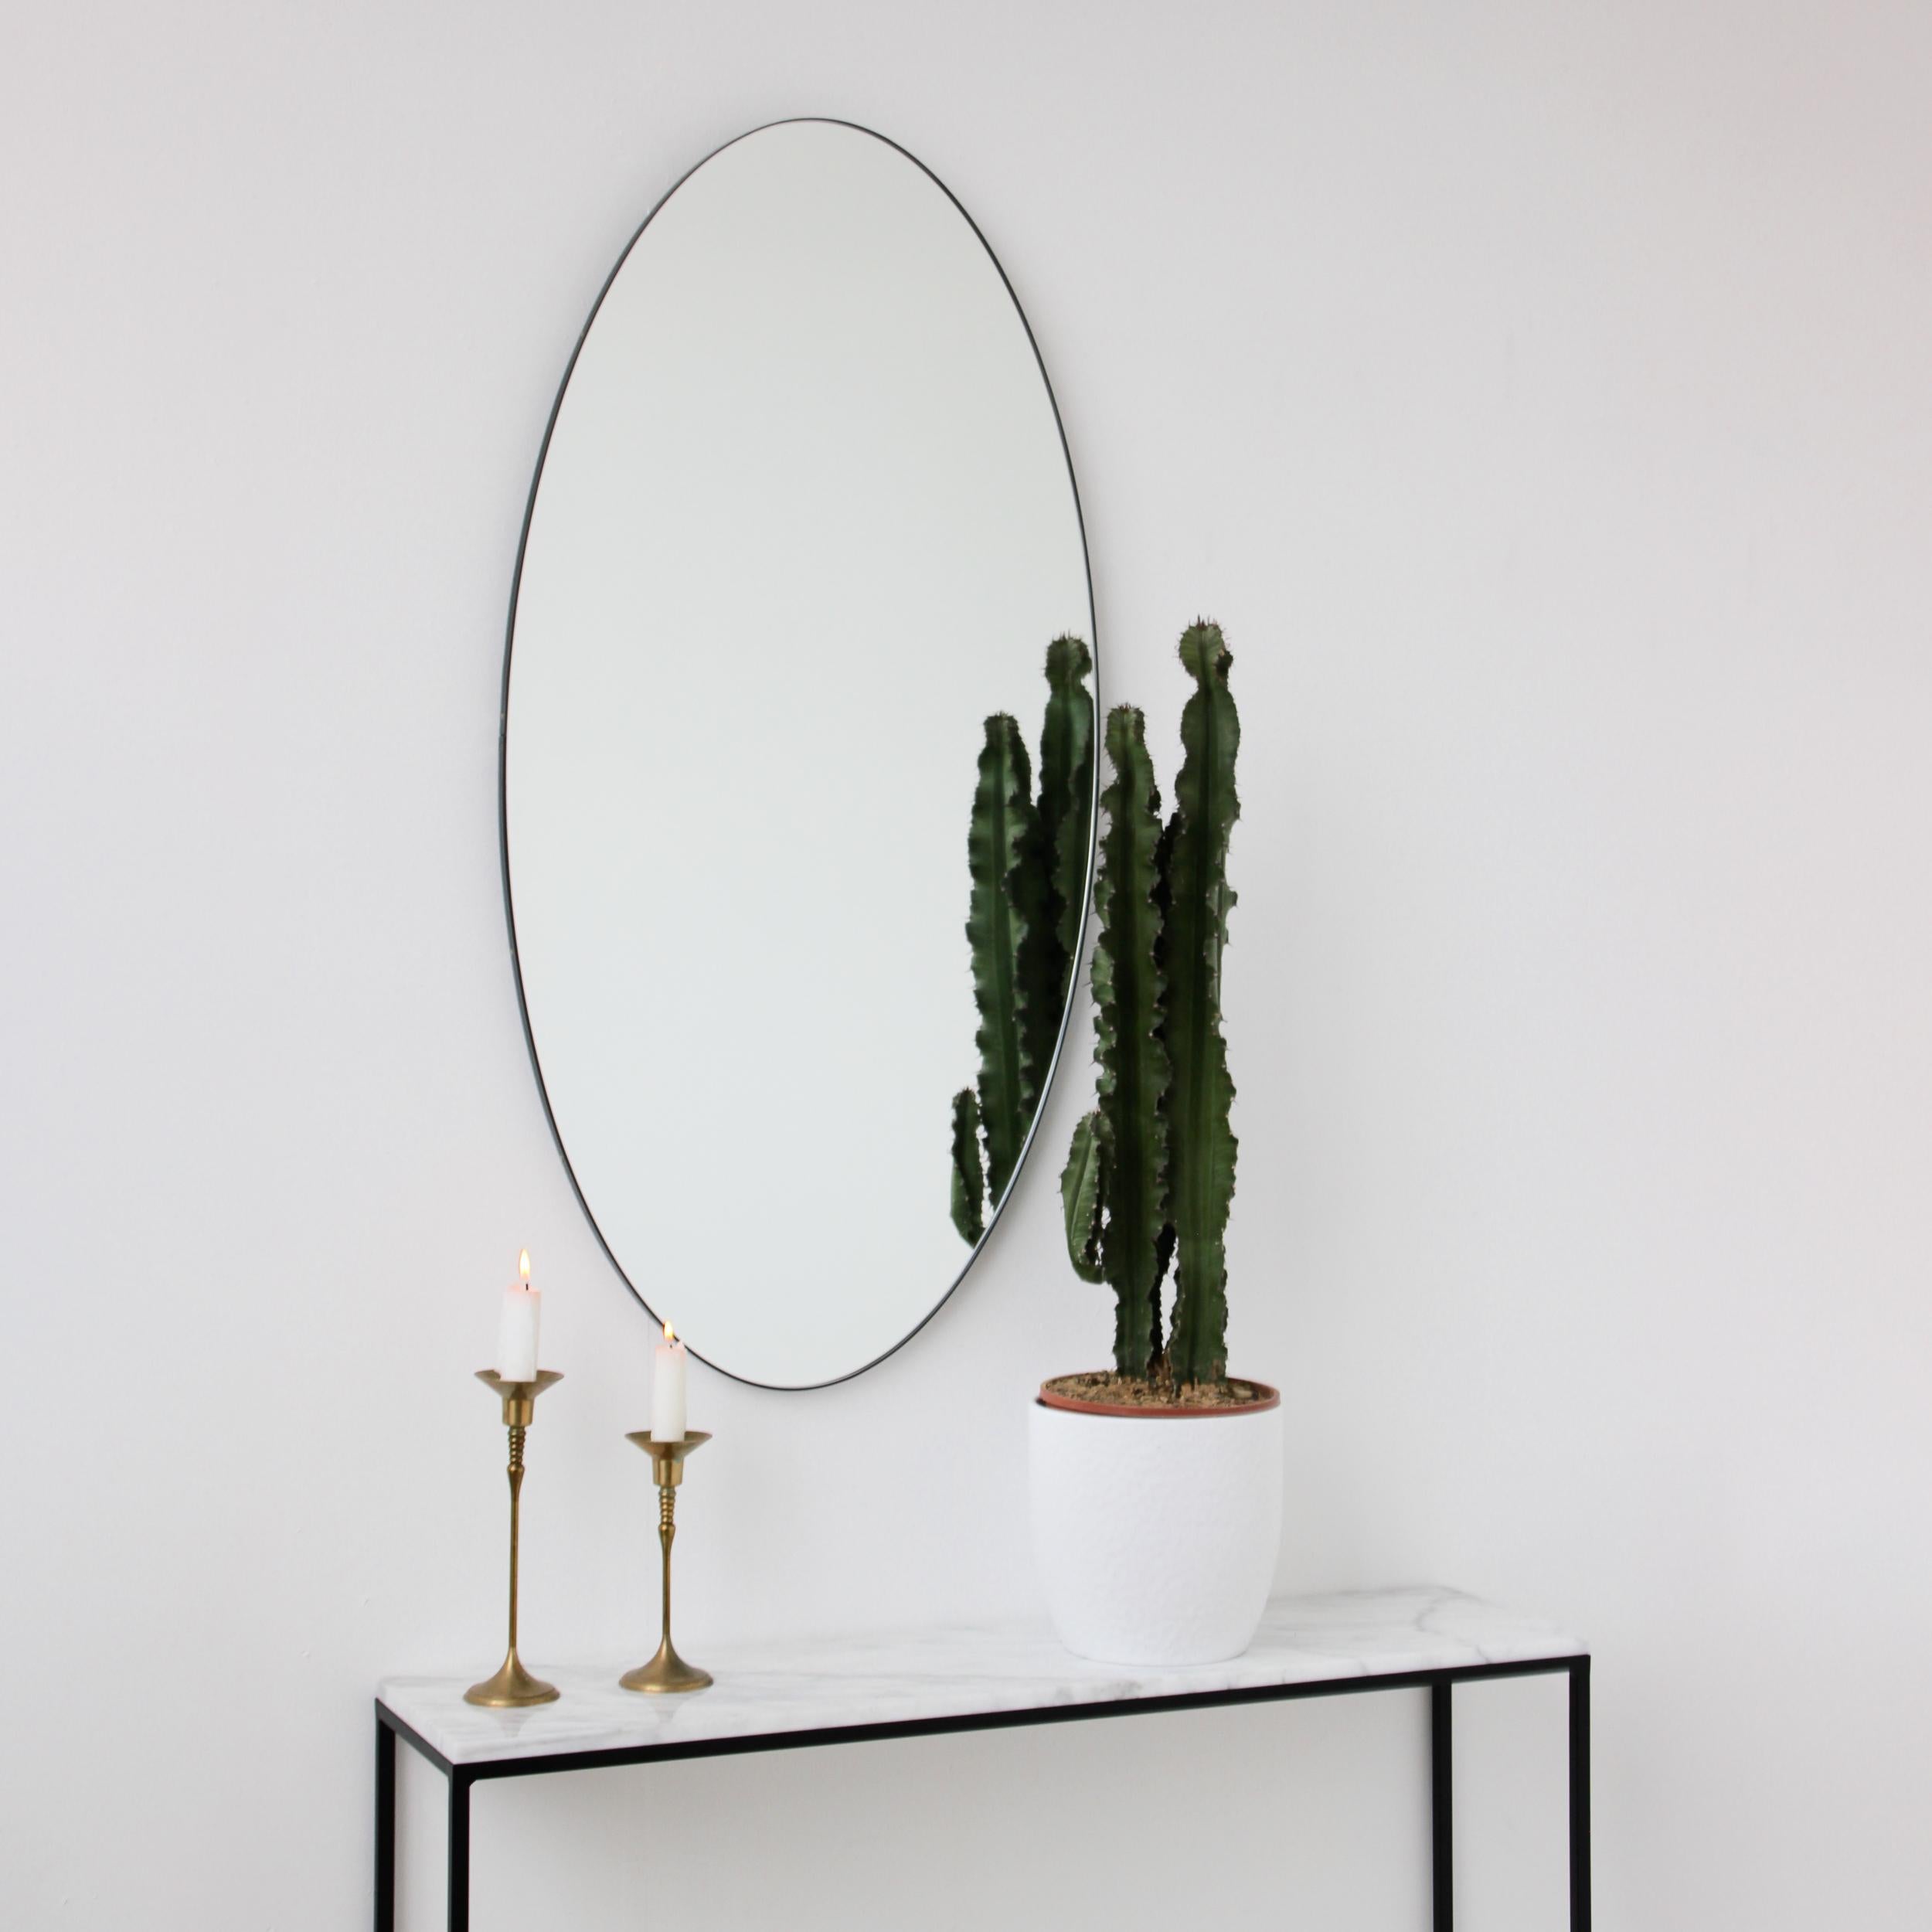 Delightful large oval mirror with a contemporary aluminium powder coated black frame. Designed and handcrafted in London, UK. Supplied fully fitted with a specialist hanging system for an easy installation.

Medium, large and extra-large (37cm x